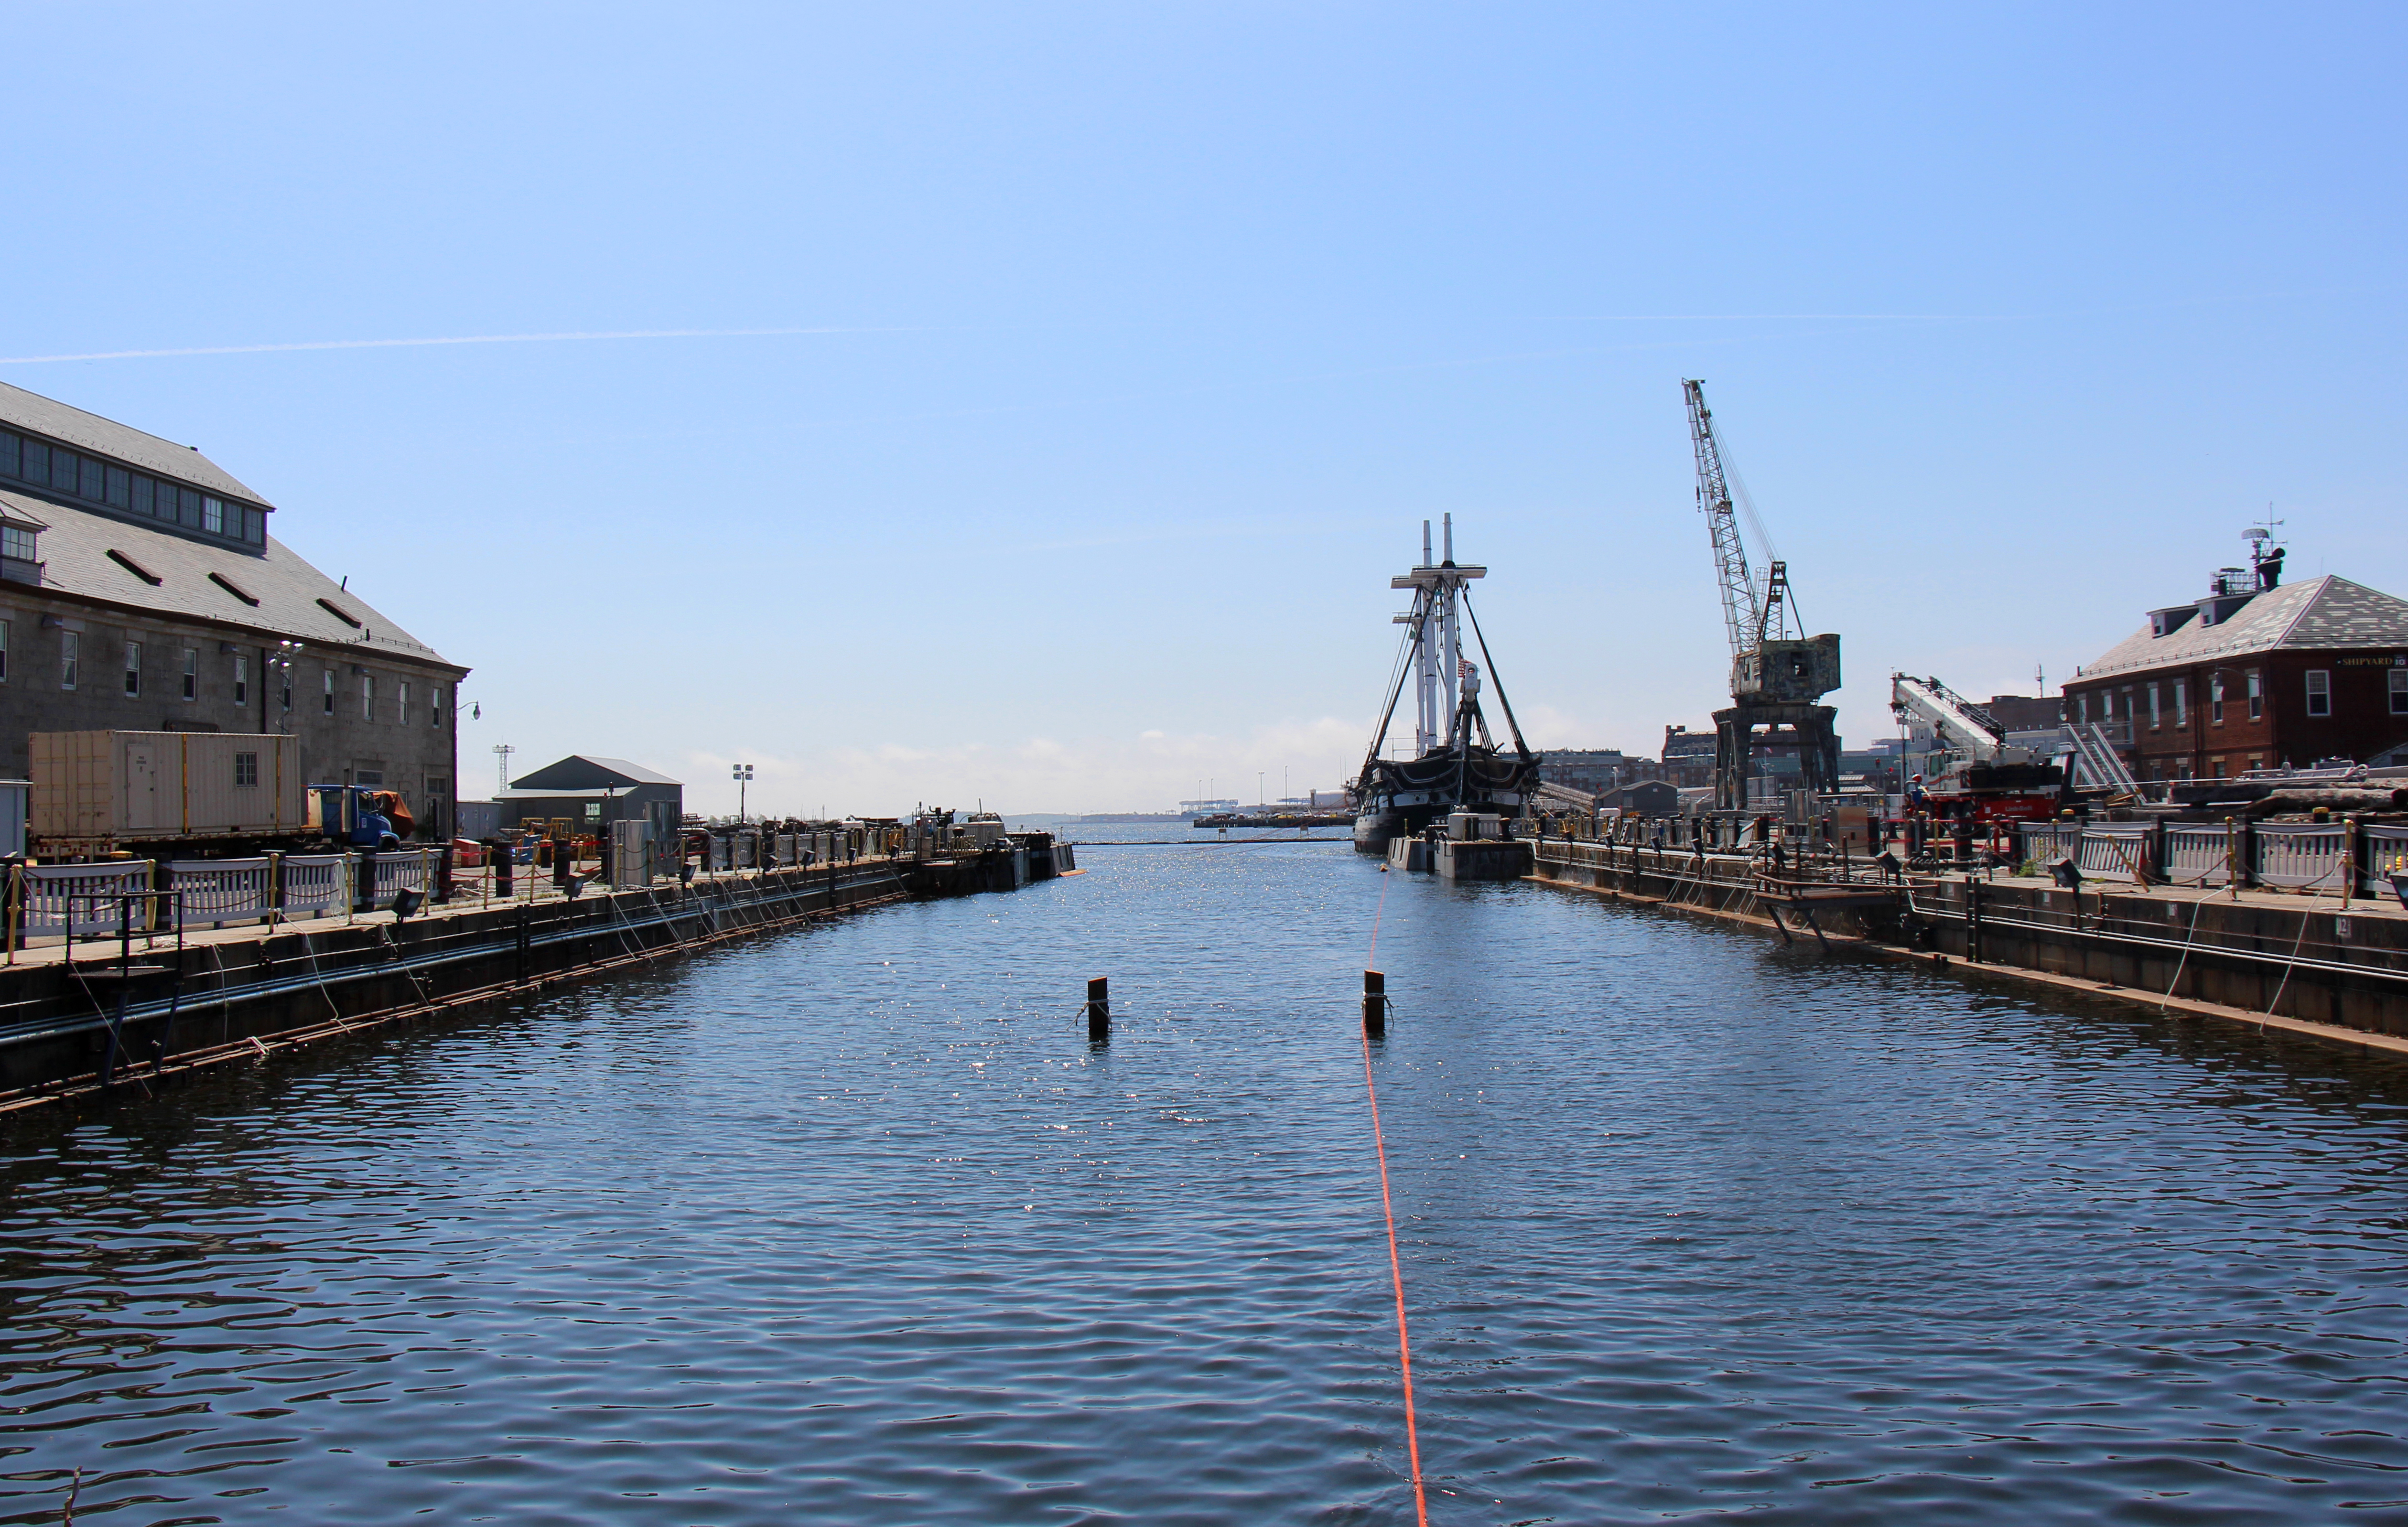 Dry Dock 1 filled with water, on May 18, 2015. USS Constitution is tied up in the background. [Courtesy USS Constitution Museum]